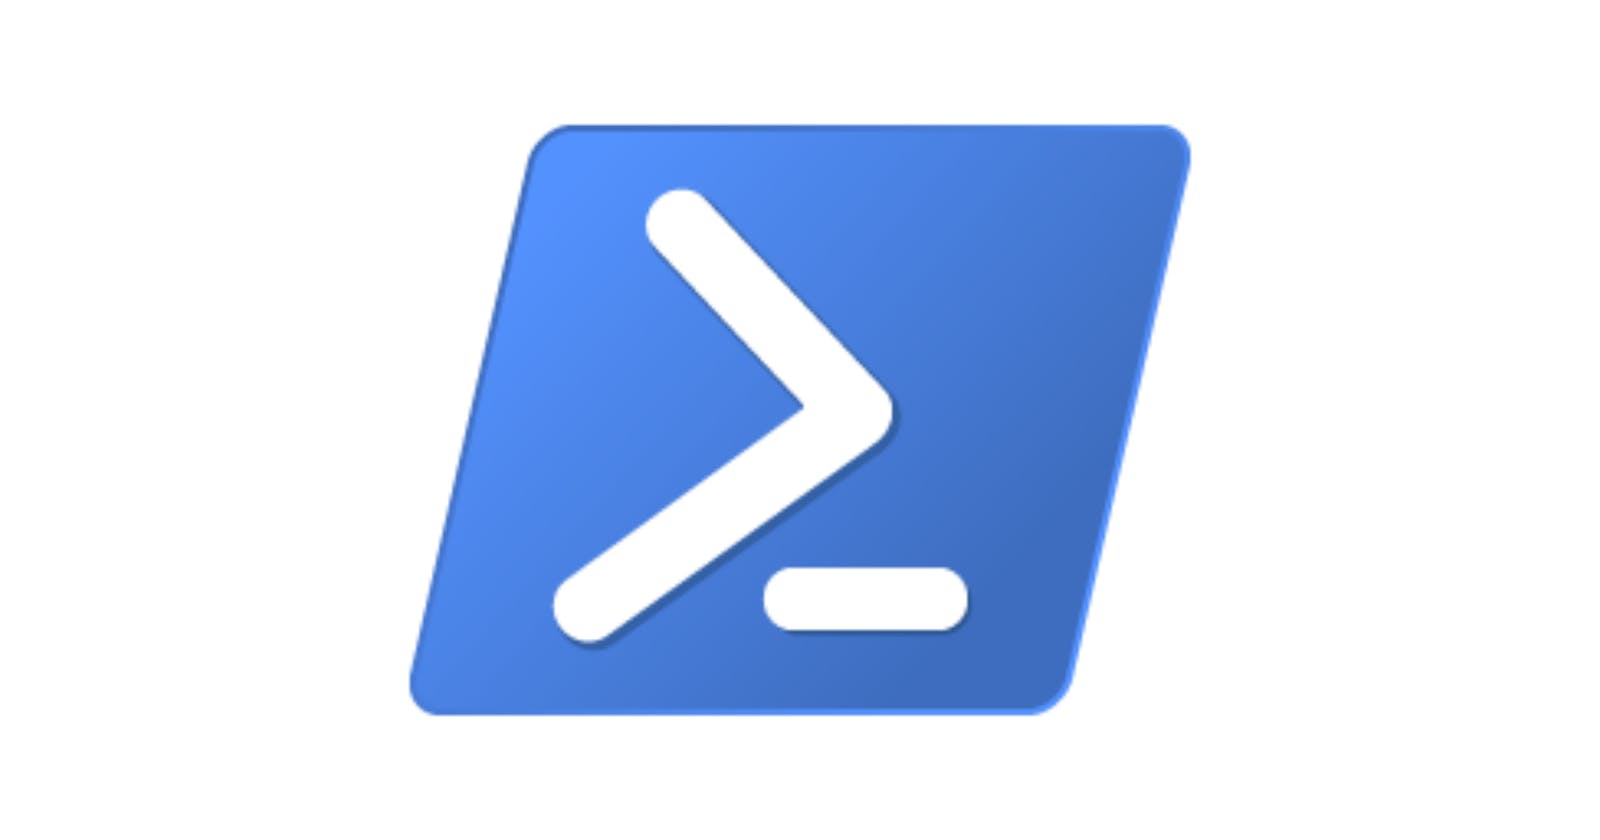 Copying Files From Local To Remote Using PowerShell